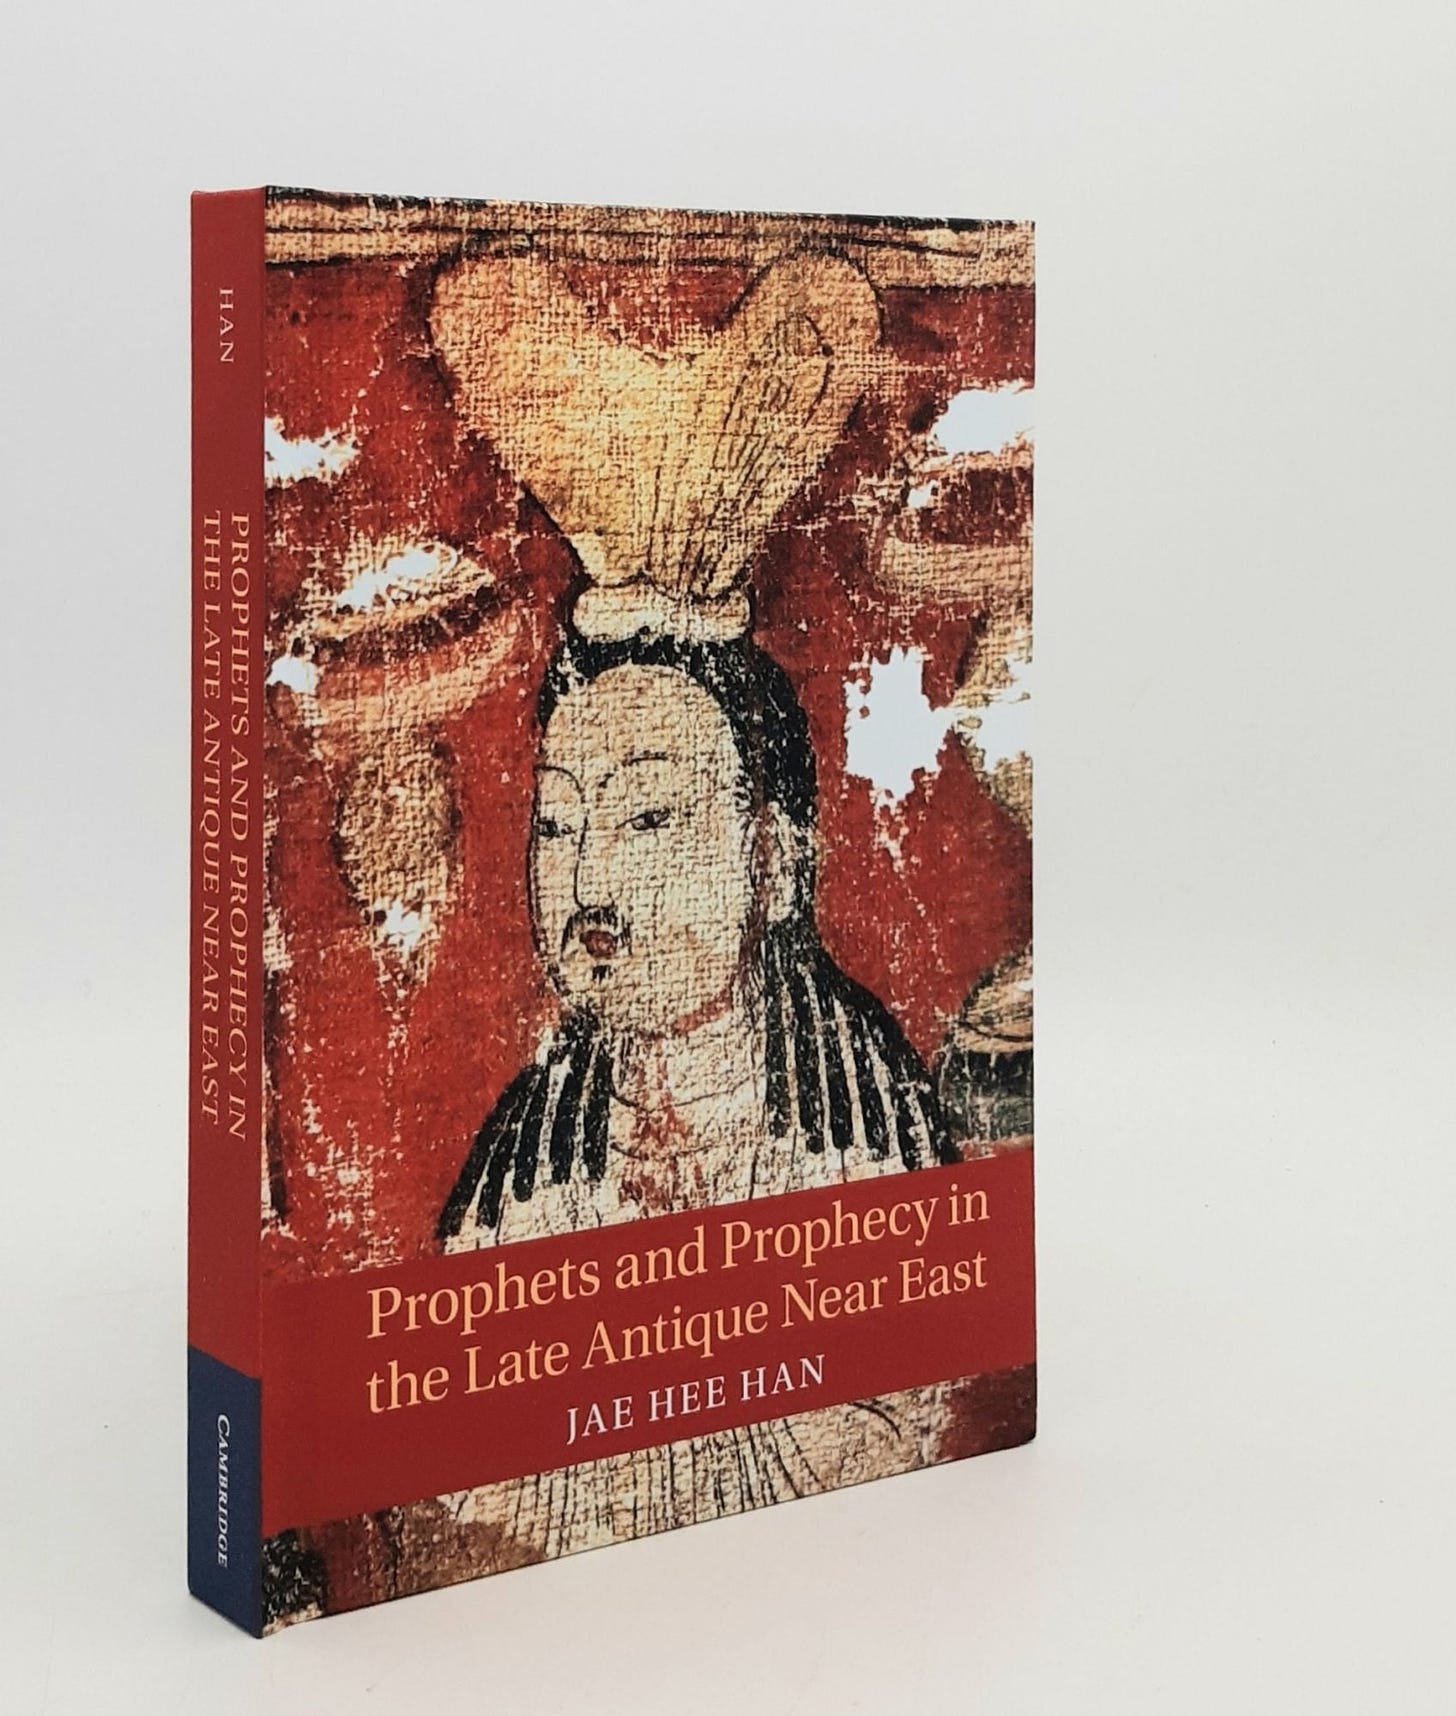 PROPHETS AND PROPHECY IN THE LATE ANTIQUE NEAR EAST | HAN Jae Hee